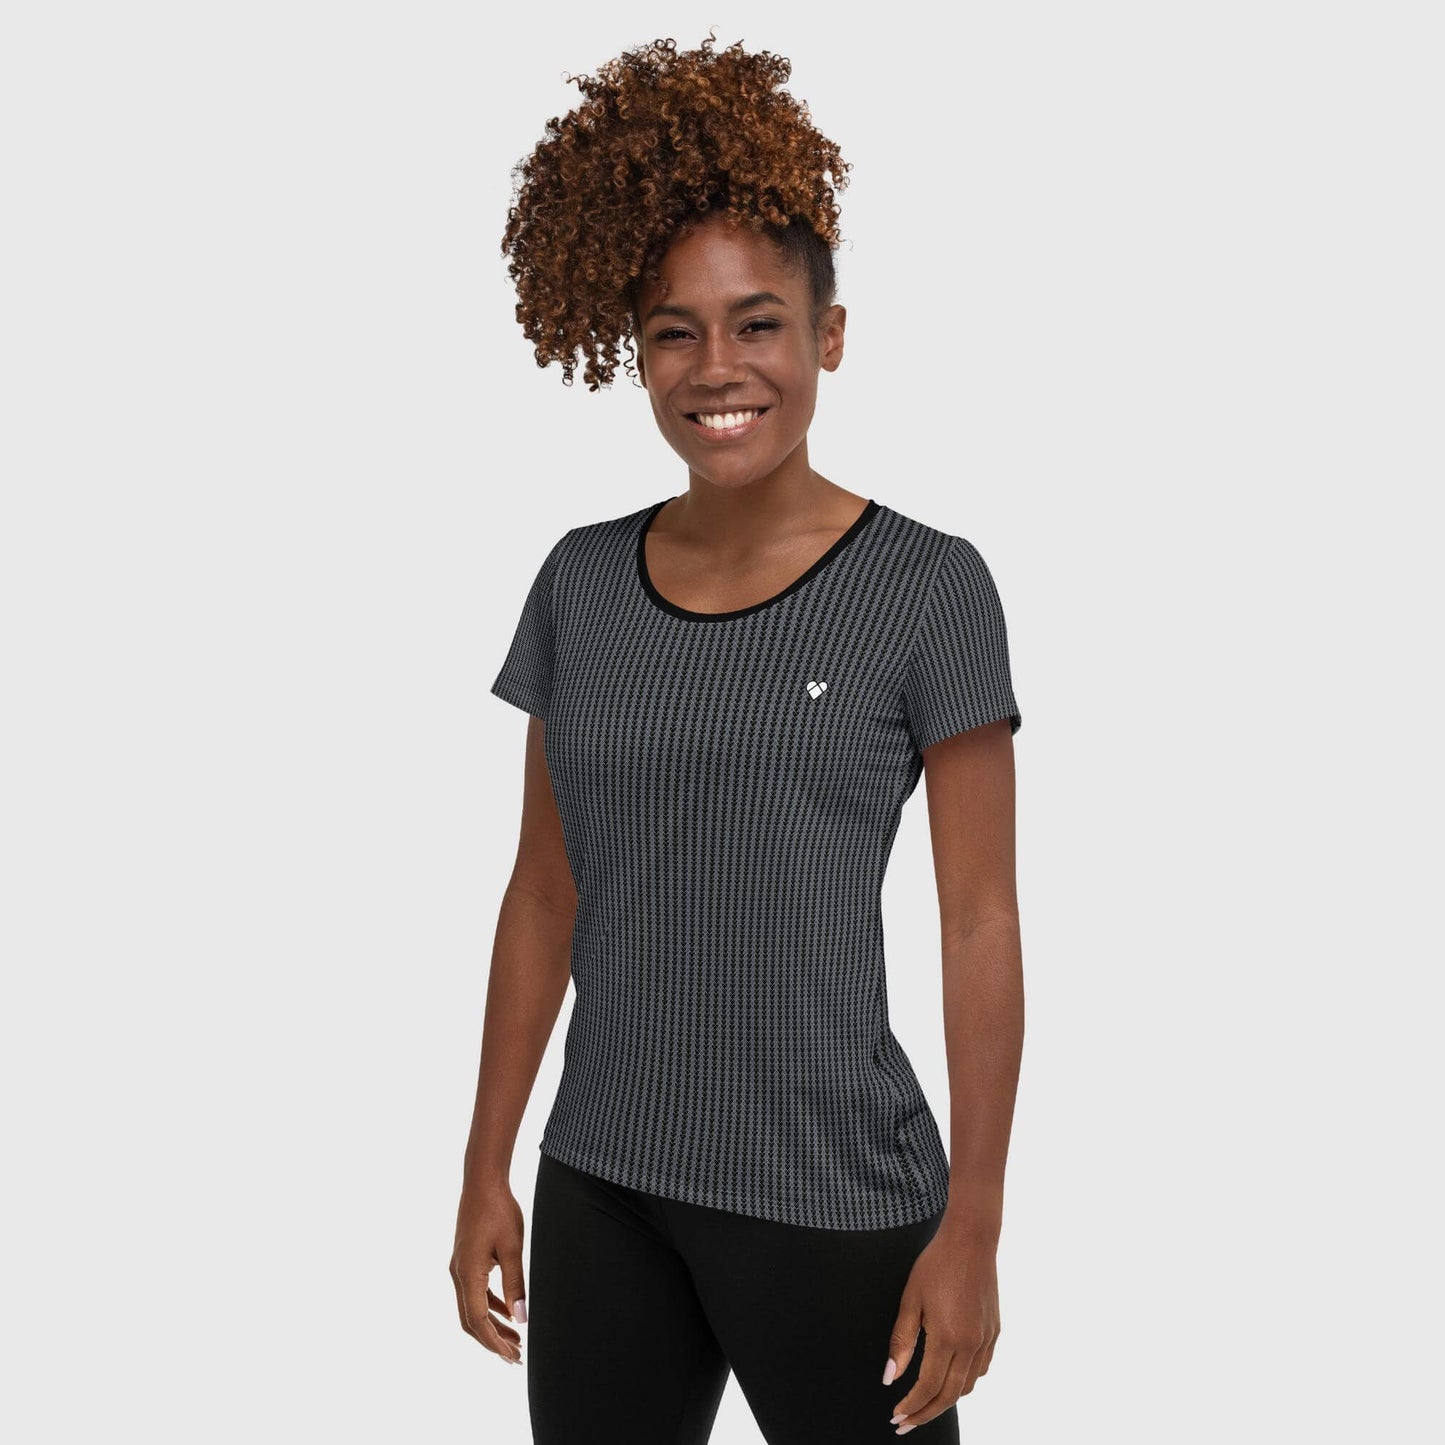 female model wearing Empowering Black Sport Shirt with Geometric Hearts, White Heart Pattern, and Logo Stripe for Gym or Athletic Activities